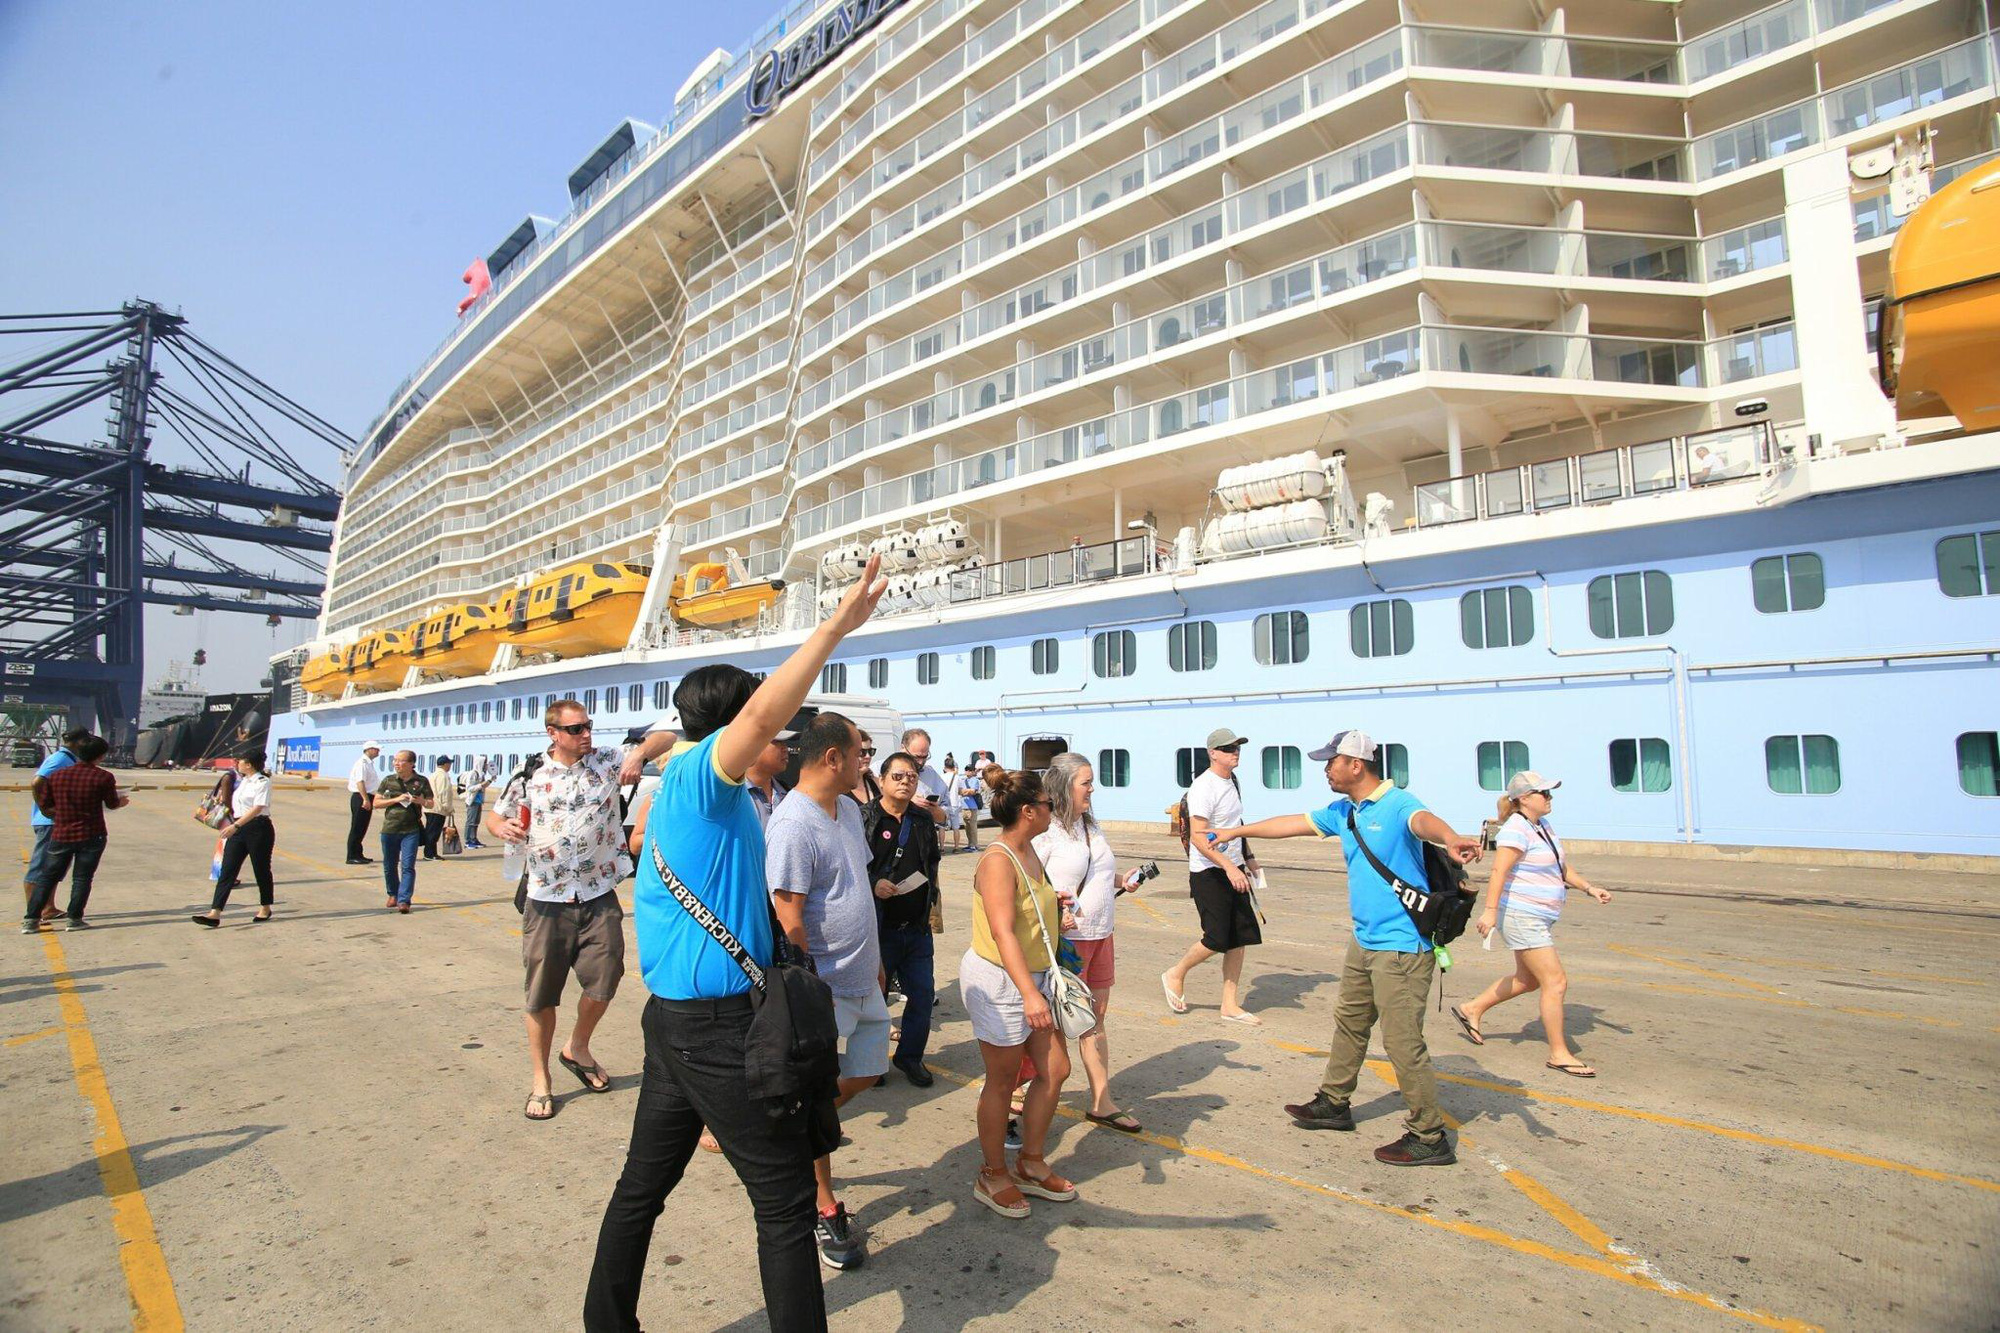 Cruise ship arrivals to Vietnam pick up in 2020